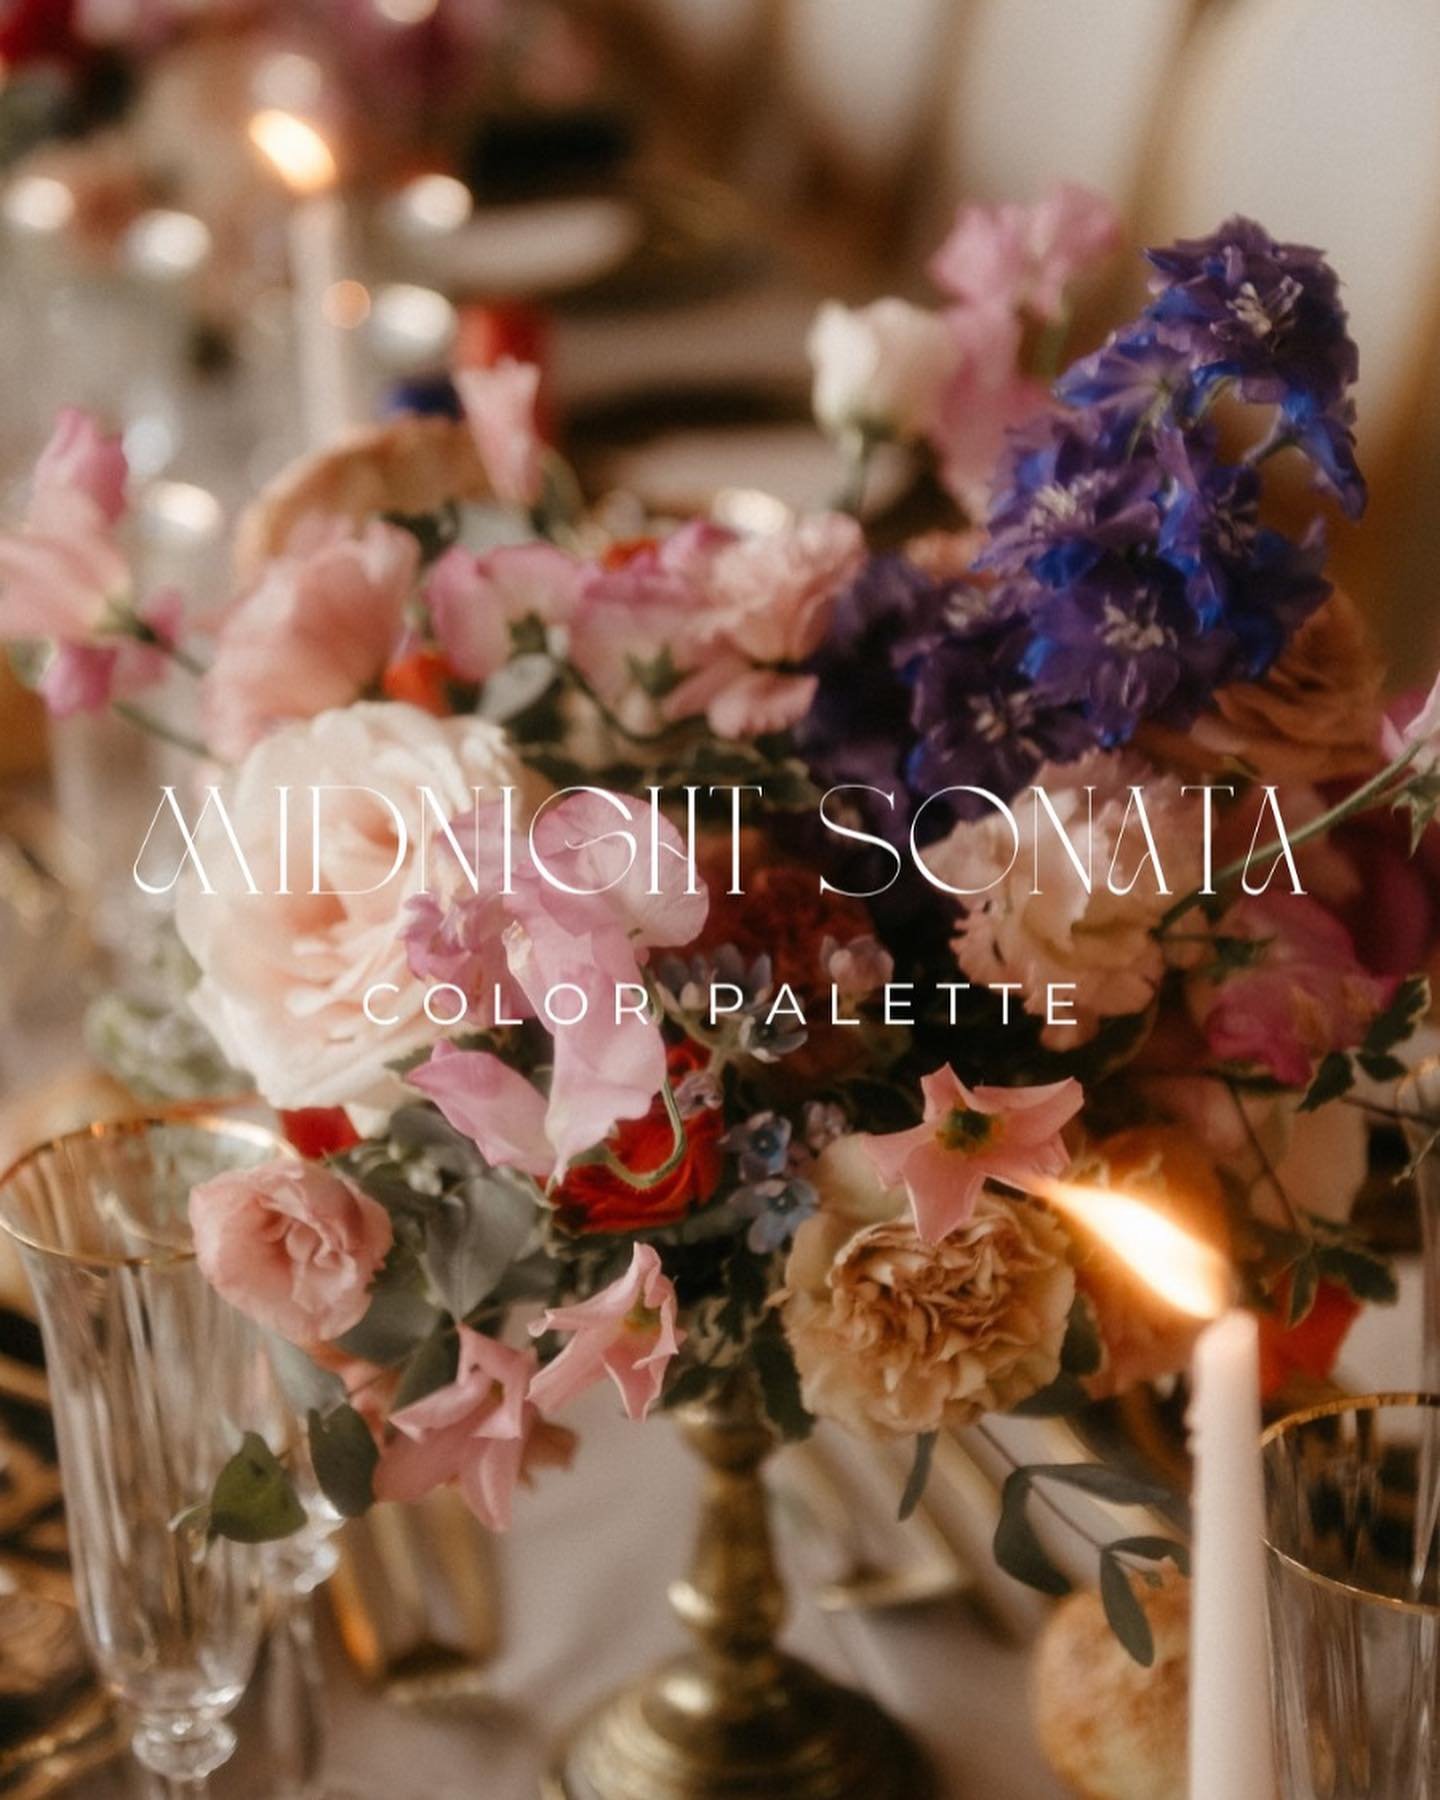 Reflecting on another stunning color palette from the past: &sbquo;Midnight Sonata&lsquo; 🌙✨

Are you struggling to choose the perfect colors for your wedding or need help with the overall styling? Let us guide you in creating your dream color schem